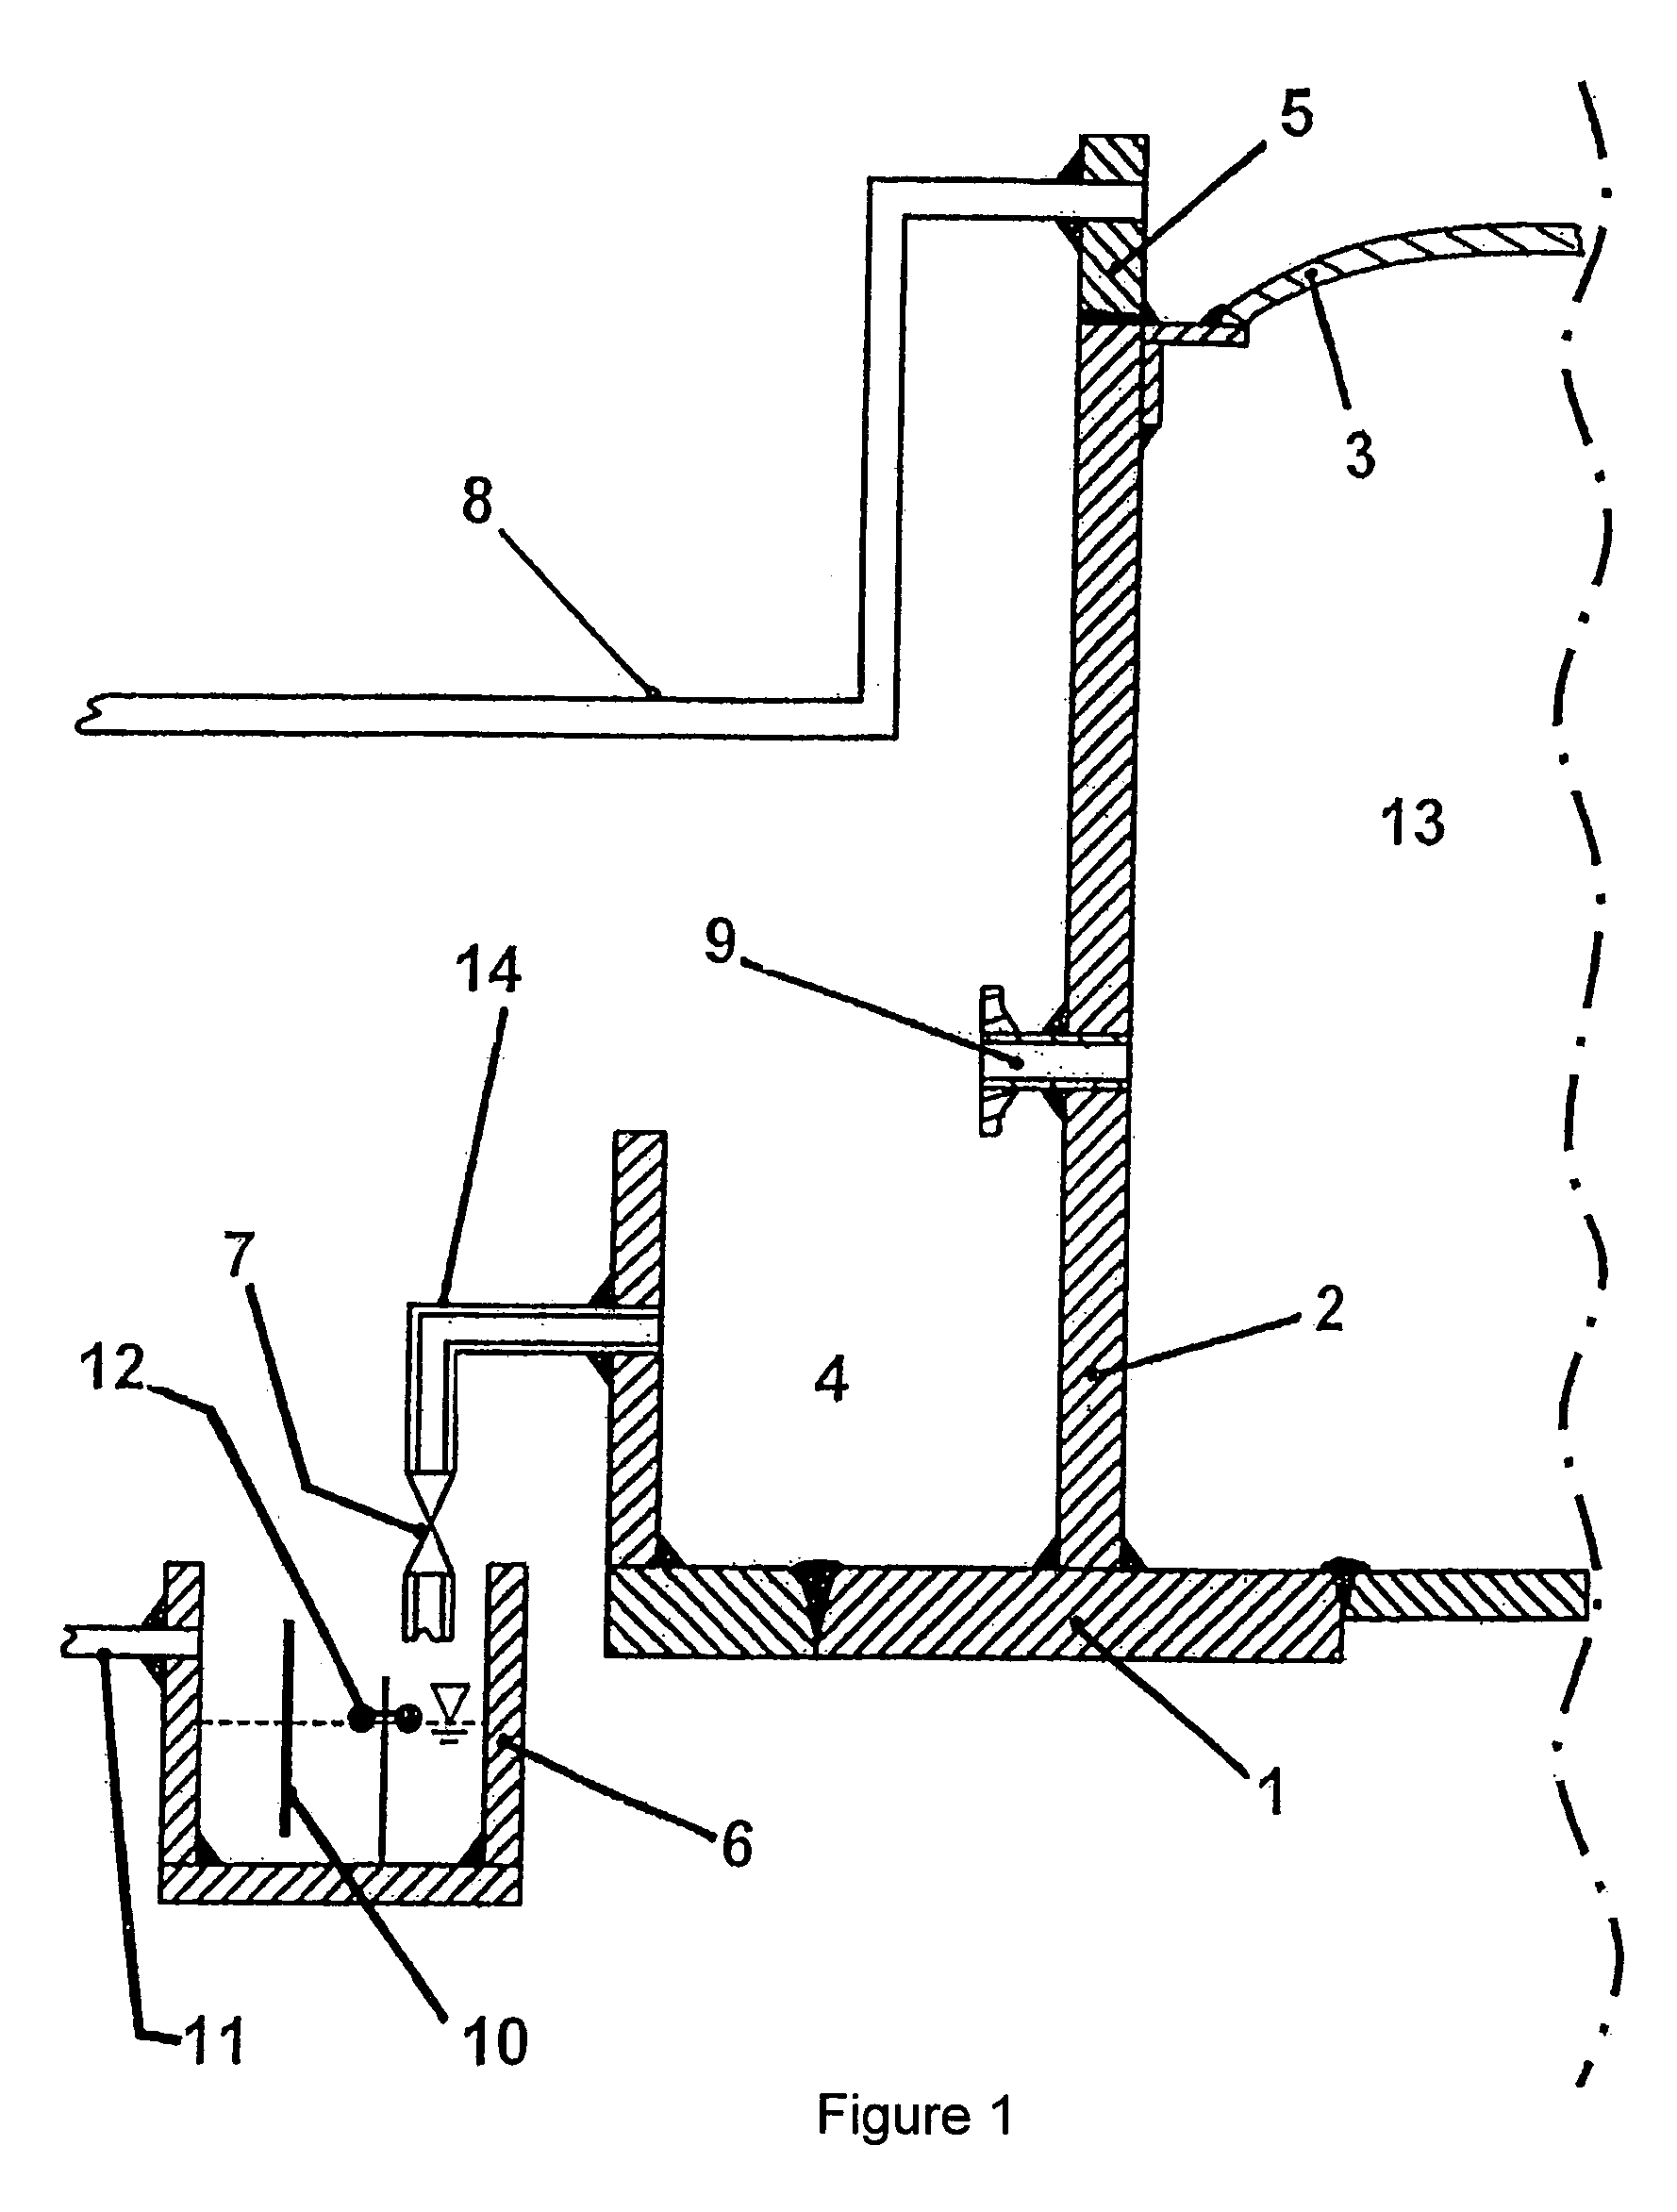 Storage container for water-endangering liquids